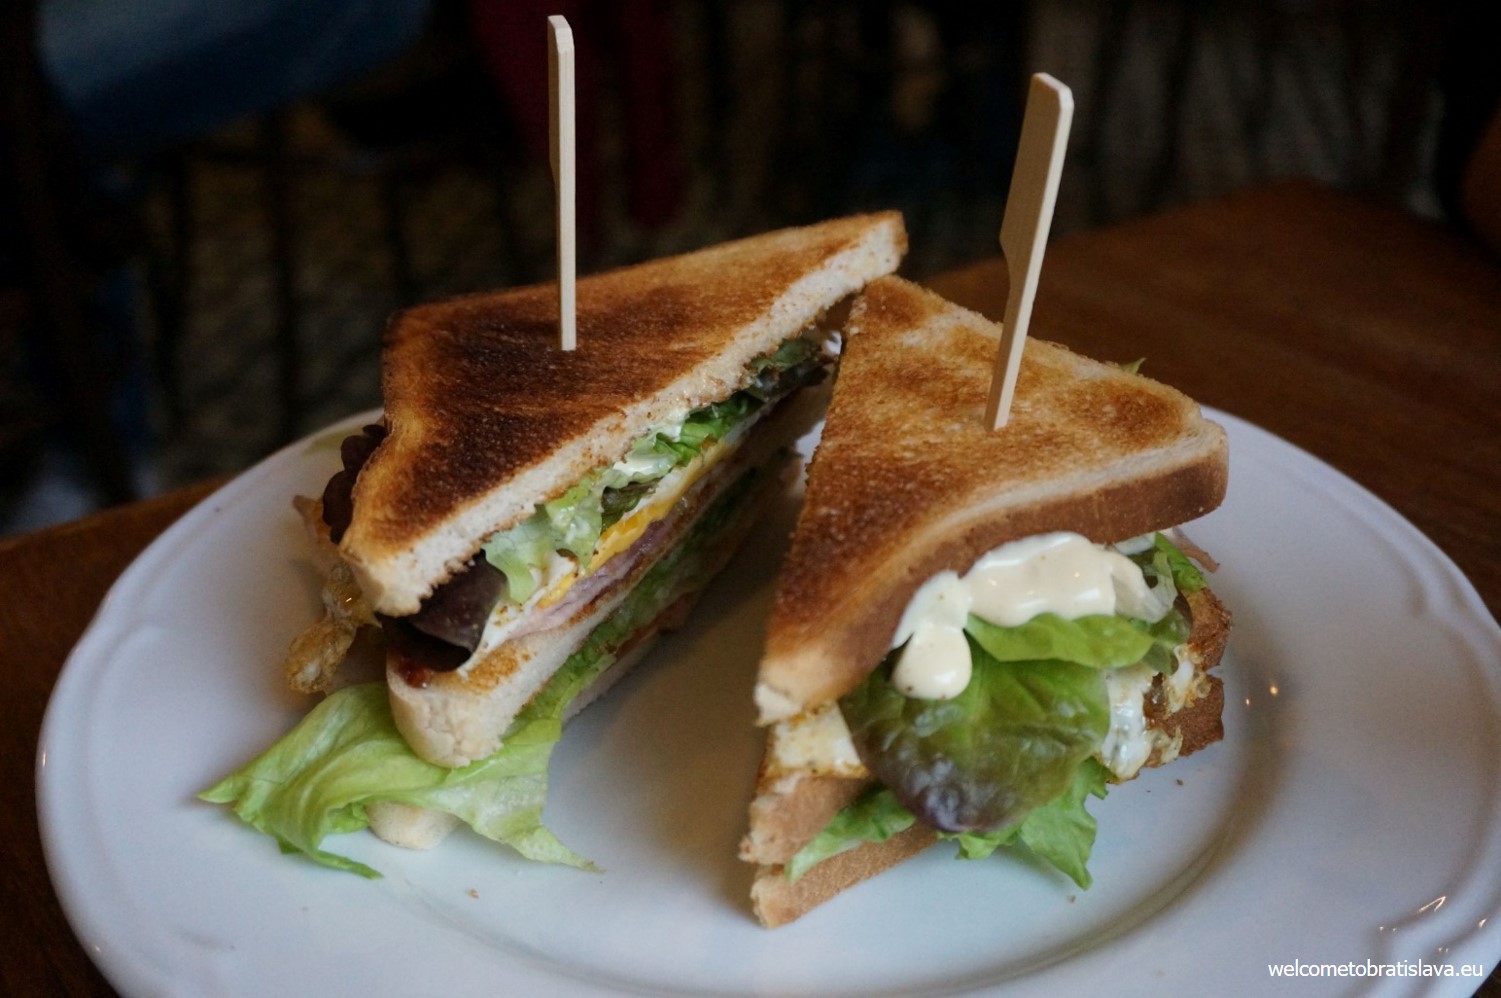 If you like sandviches, you might want to try theri Club Sandwich.